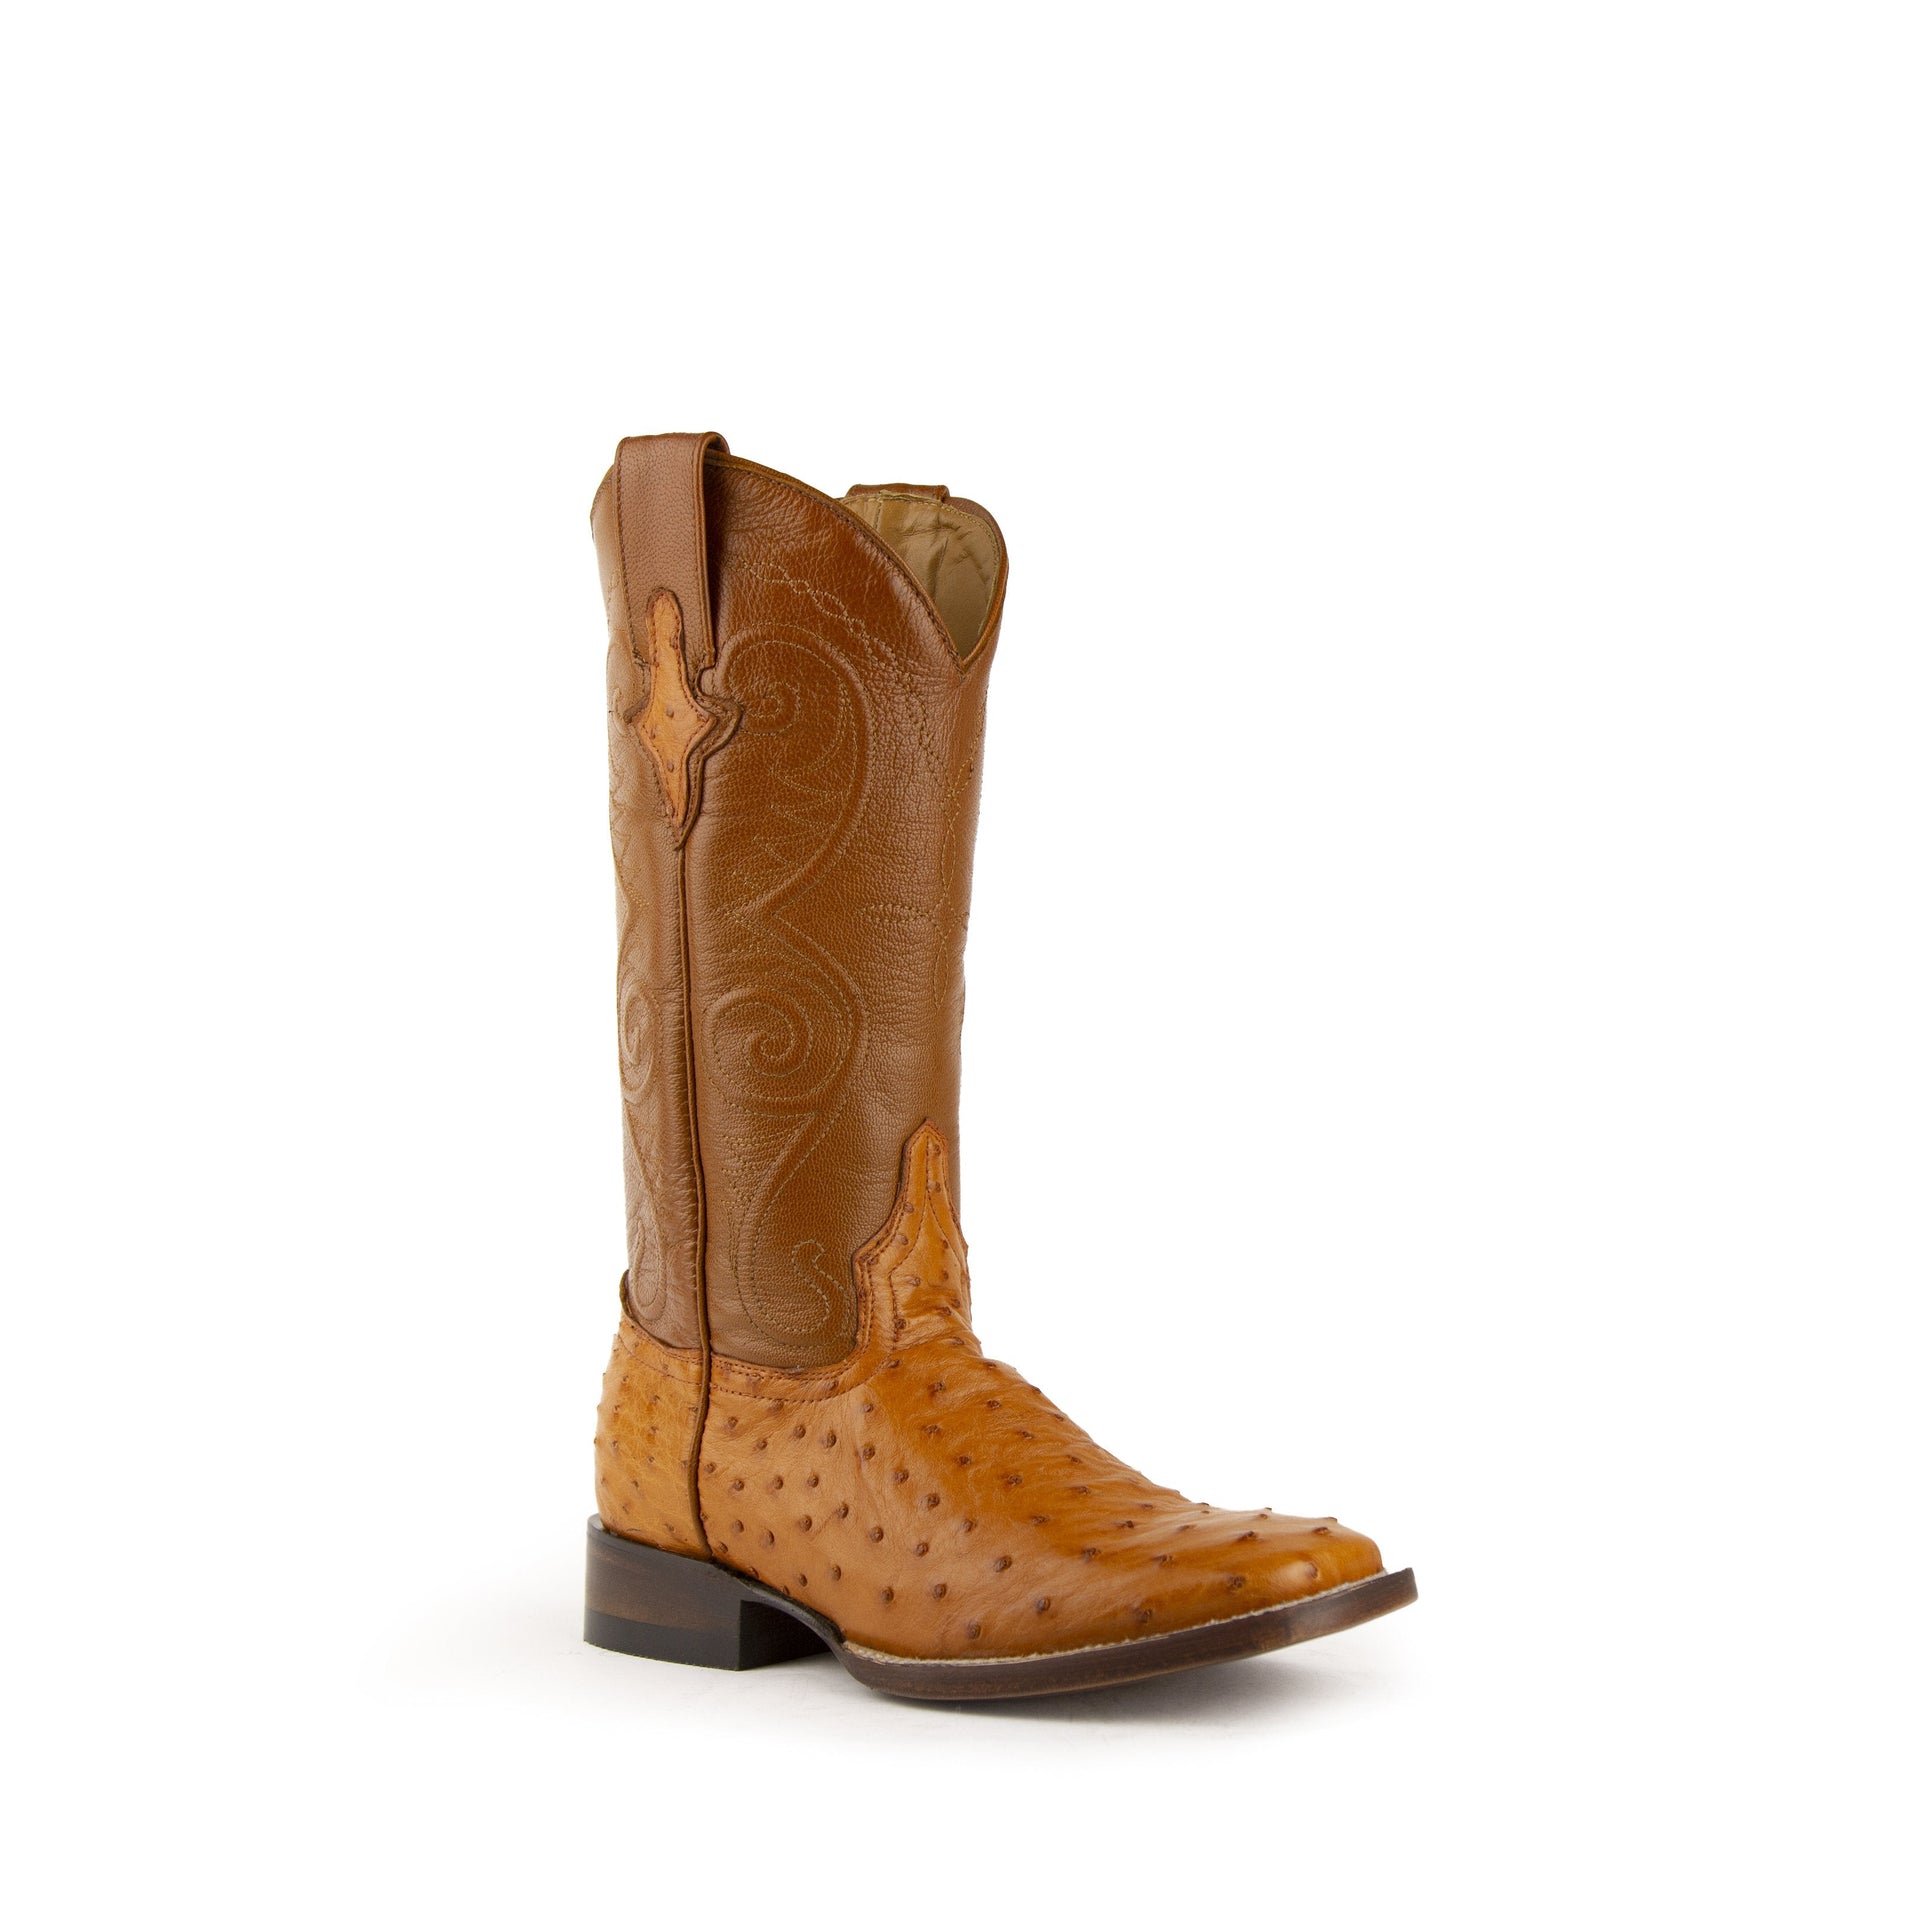 Women's Ferrini Colt Full Quill Ostrich Boots Handcrafted Cognac - yeehawcowboy